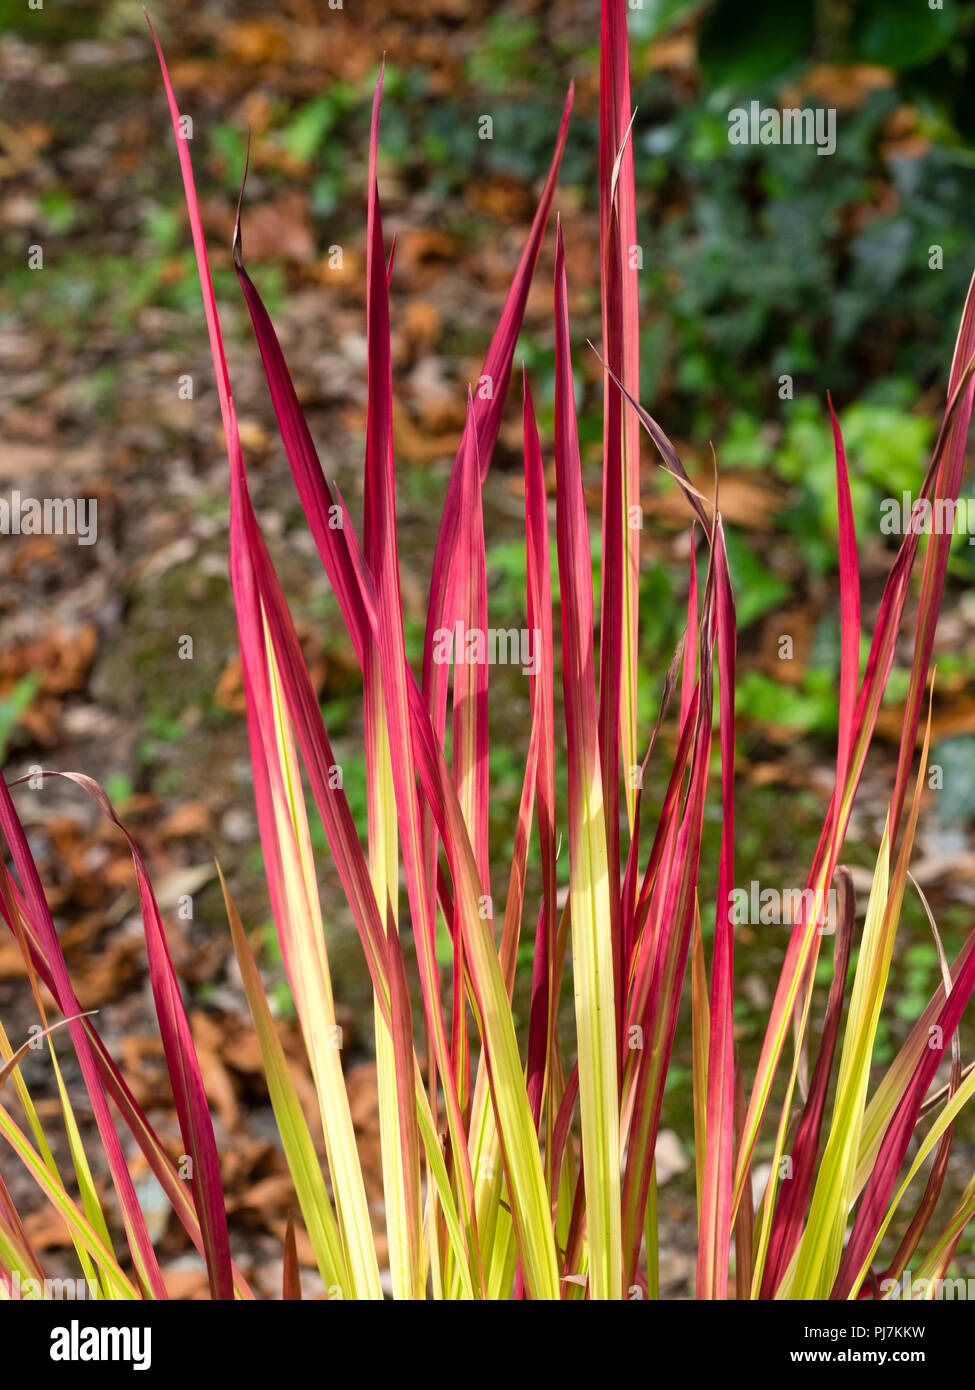 Red tipped foliage of the hardy herbaceous perennial Japanese blood grass, Imperata cylindrica 'Red Baron' Stock Photo